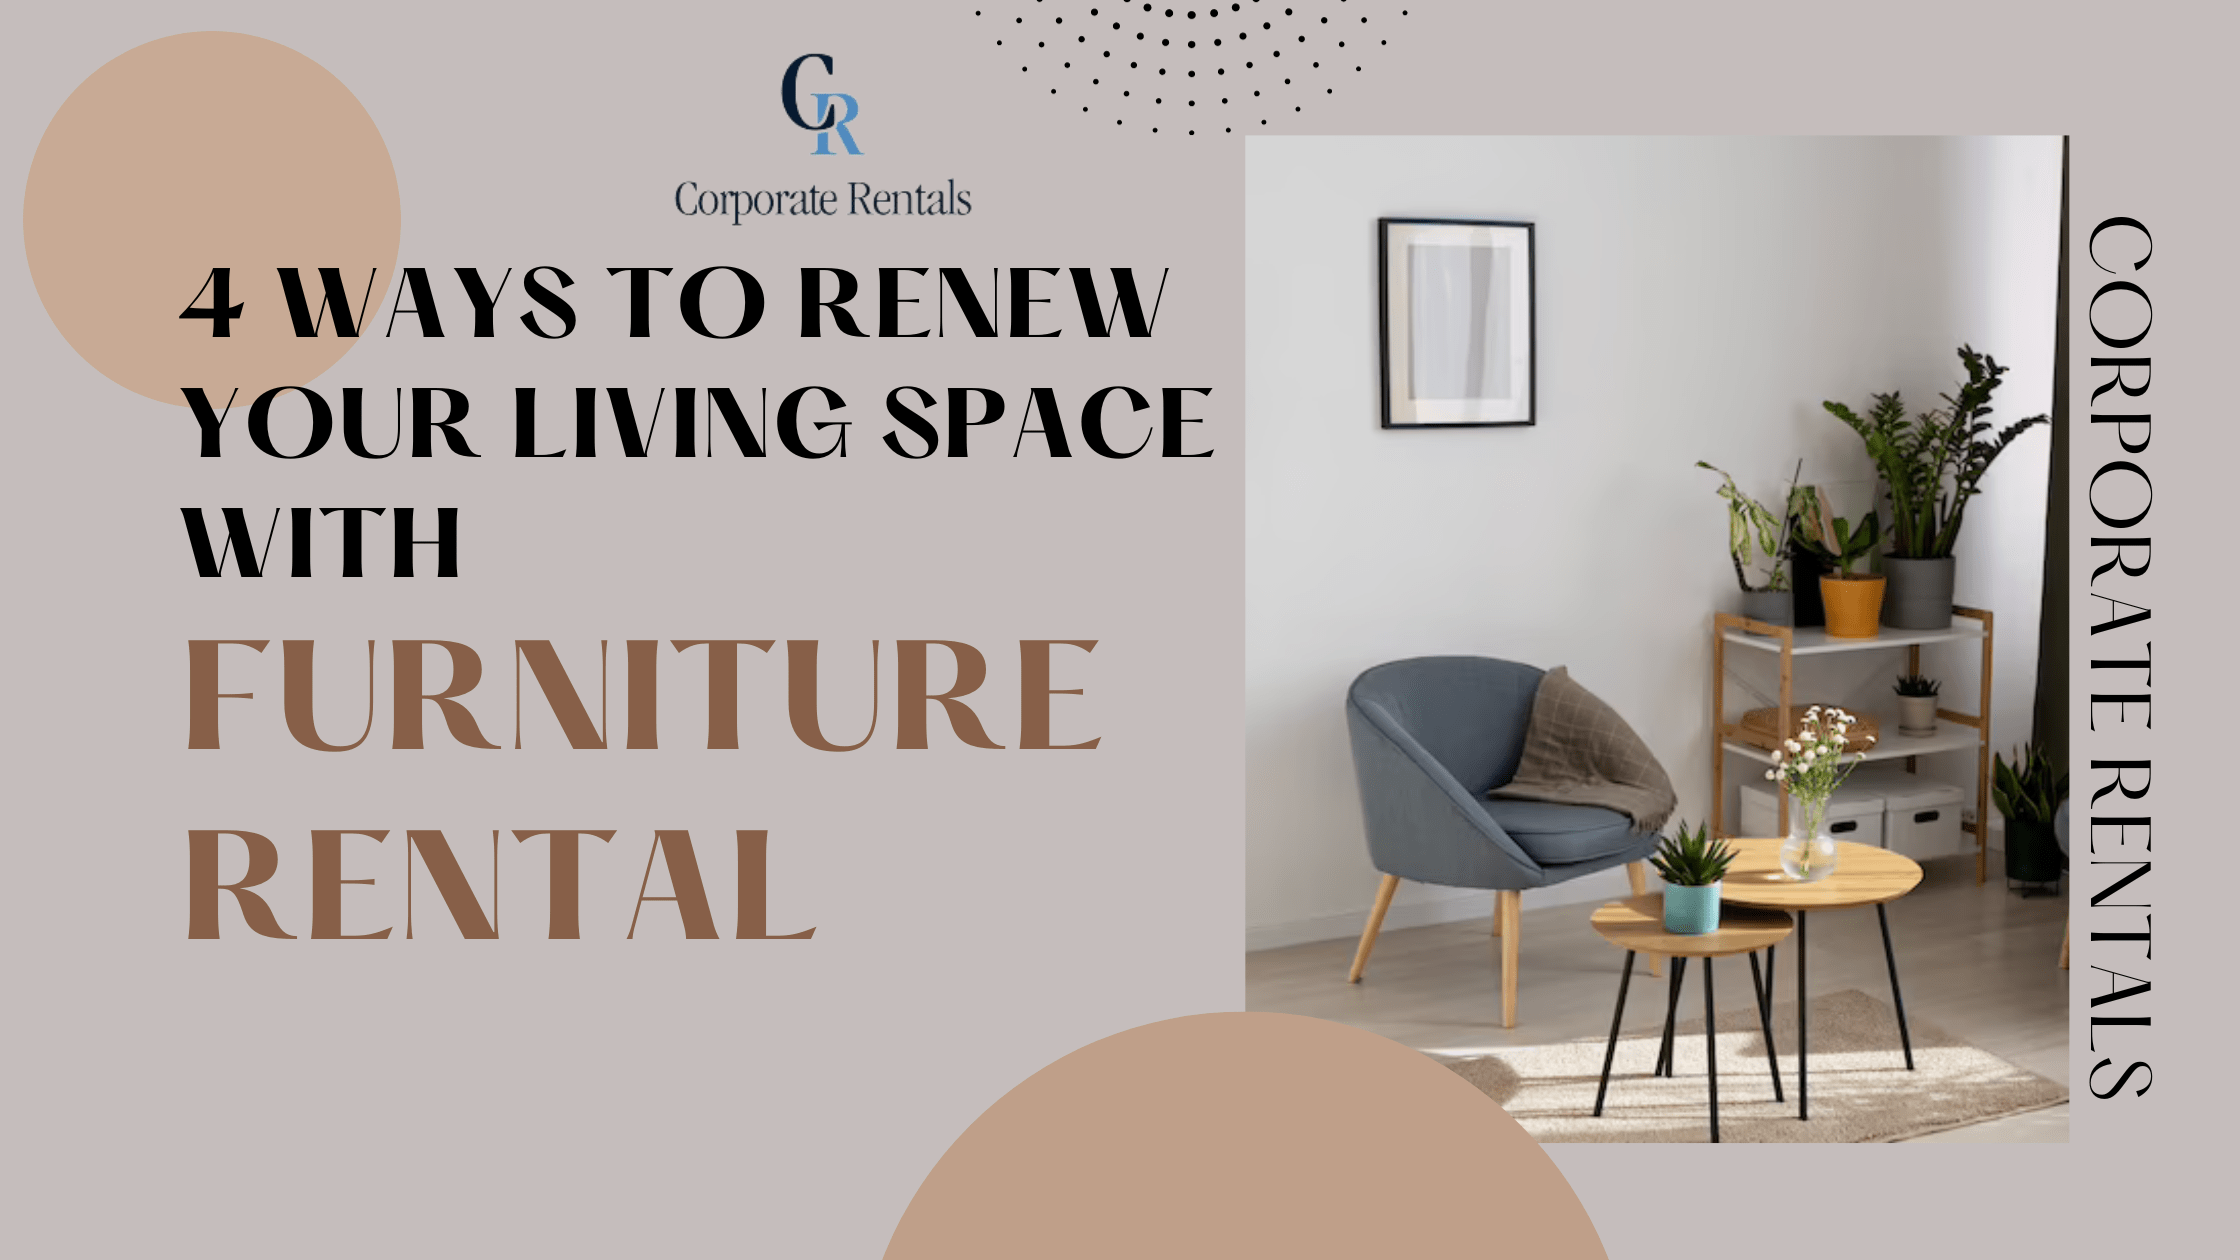 4 Ways to Renew Your Living Space with Furniture Rental